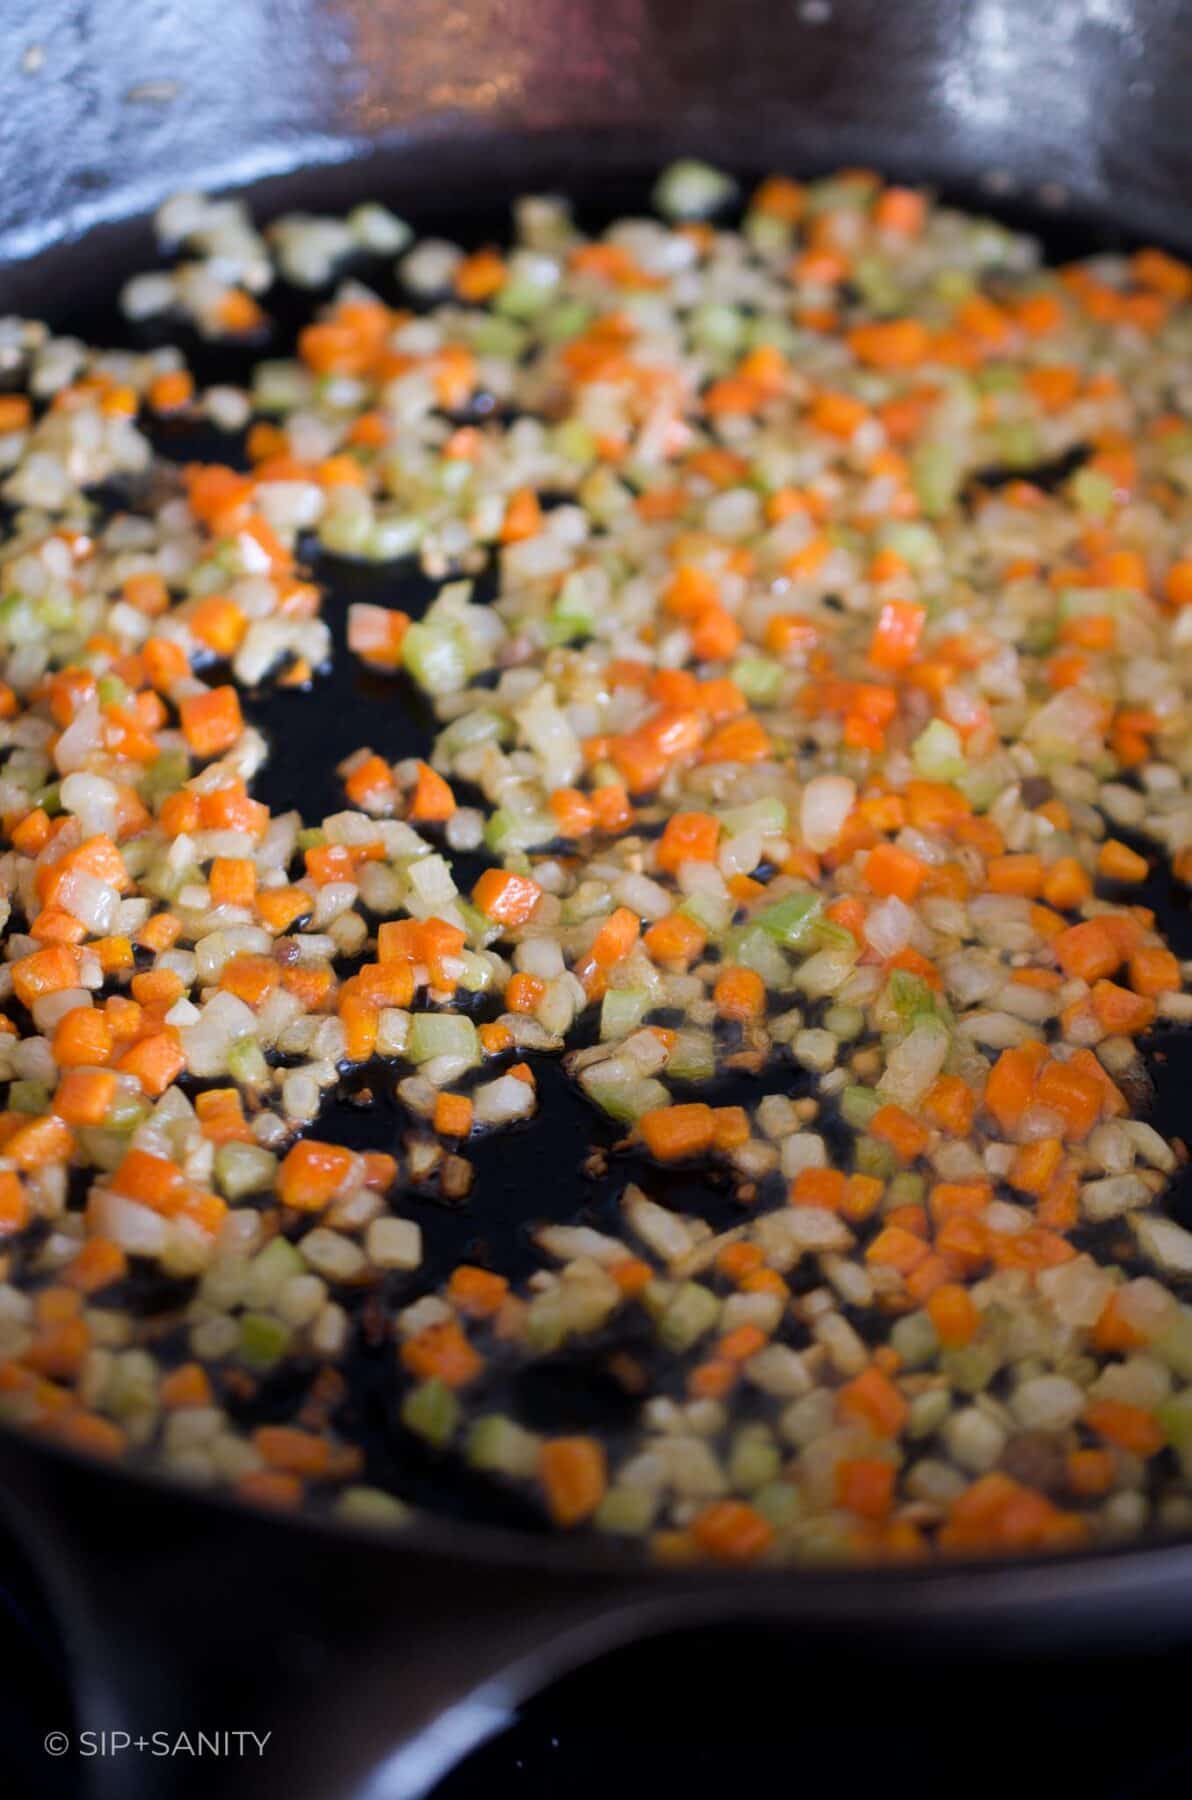 Diced carrots, celery and onion sautéing in butter in a cast iron skillet.